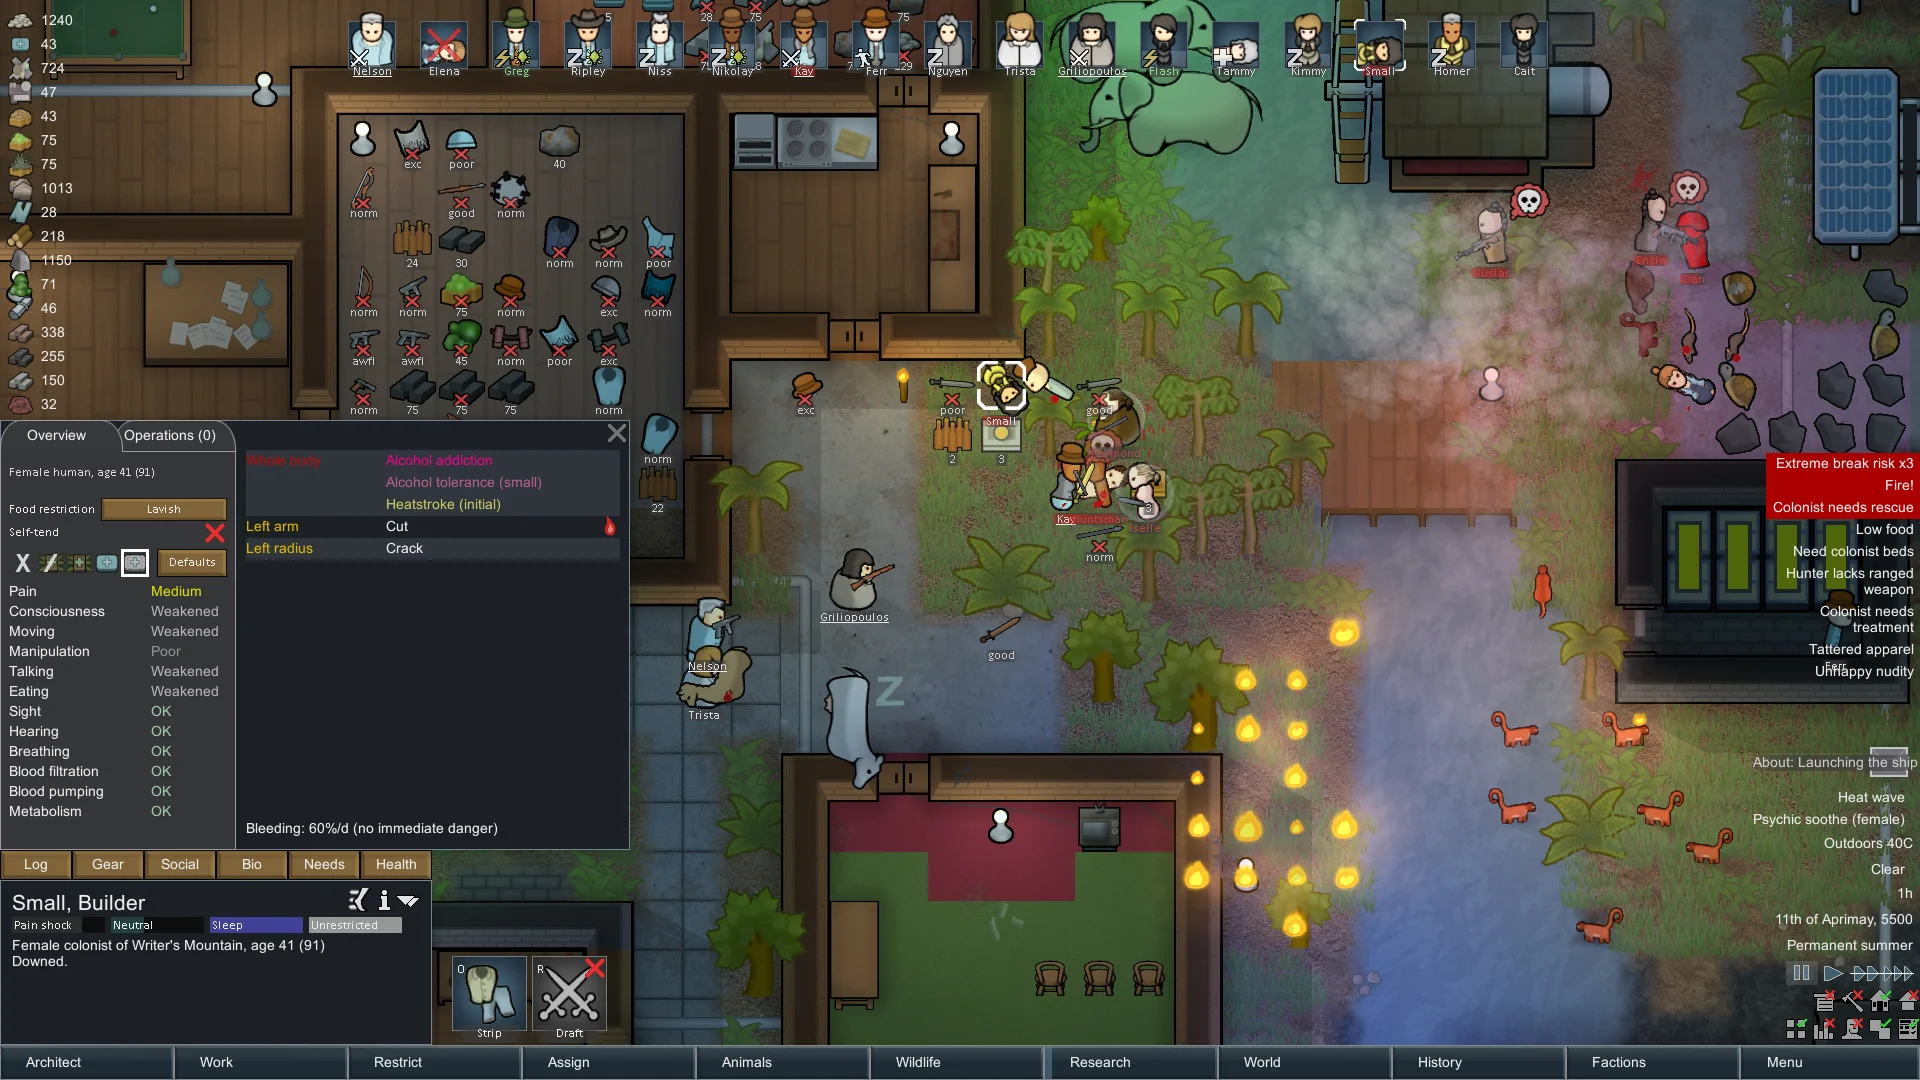 Learn how to tame Wild Man in Rimworld